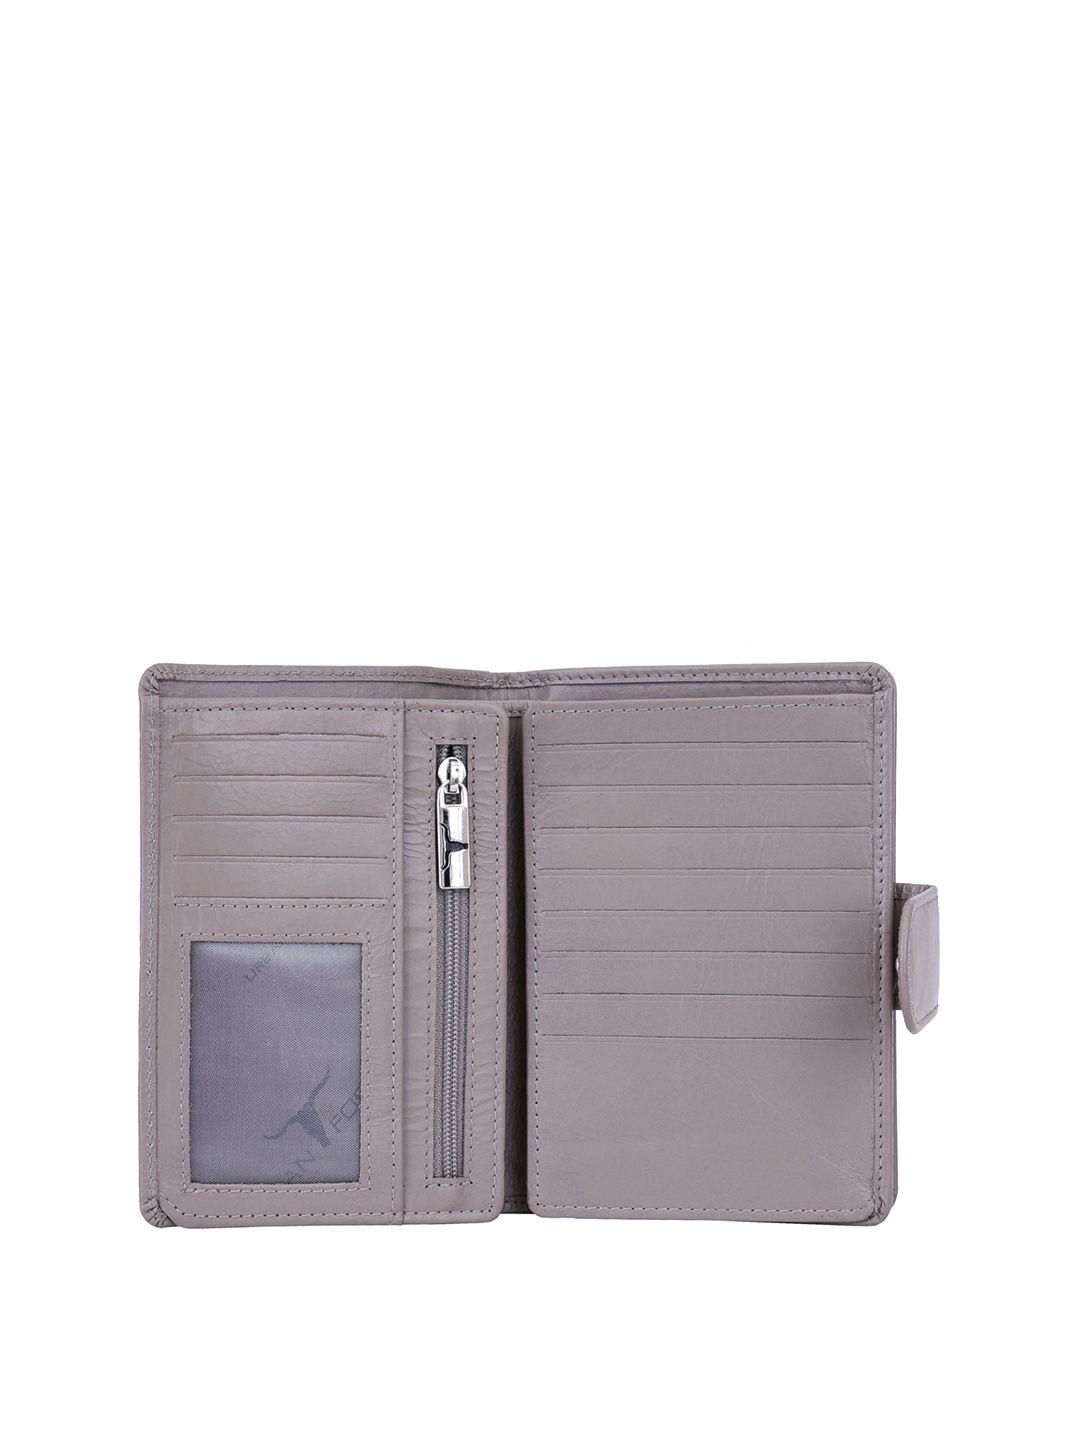 urban forest women leather rfid blocking two fold wallet